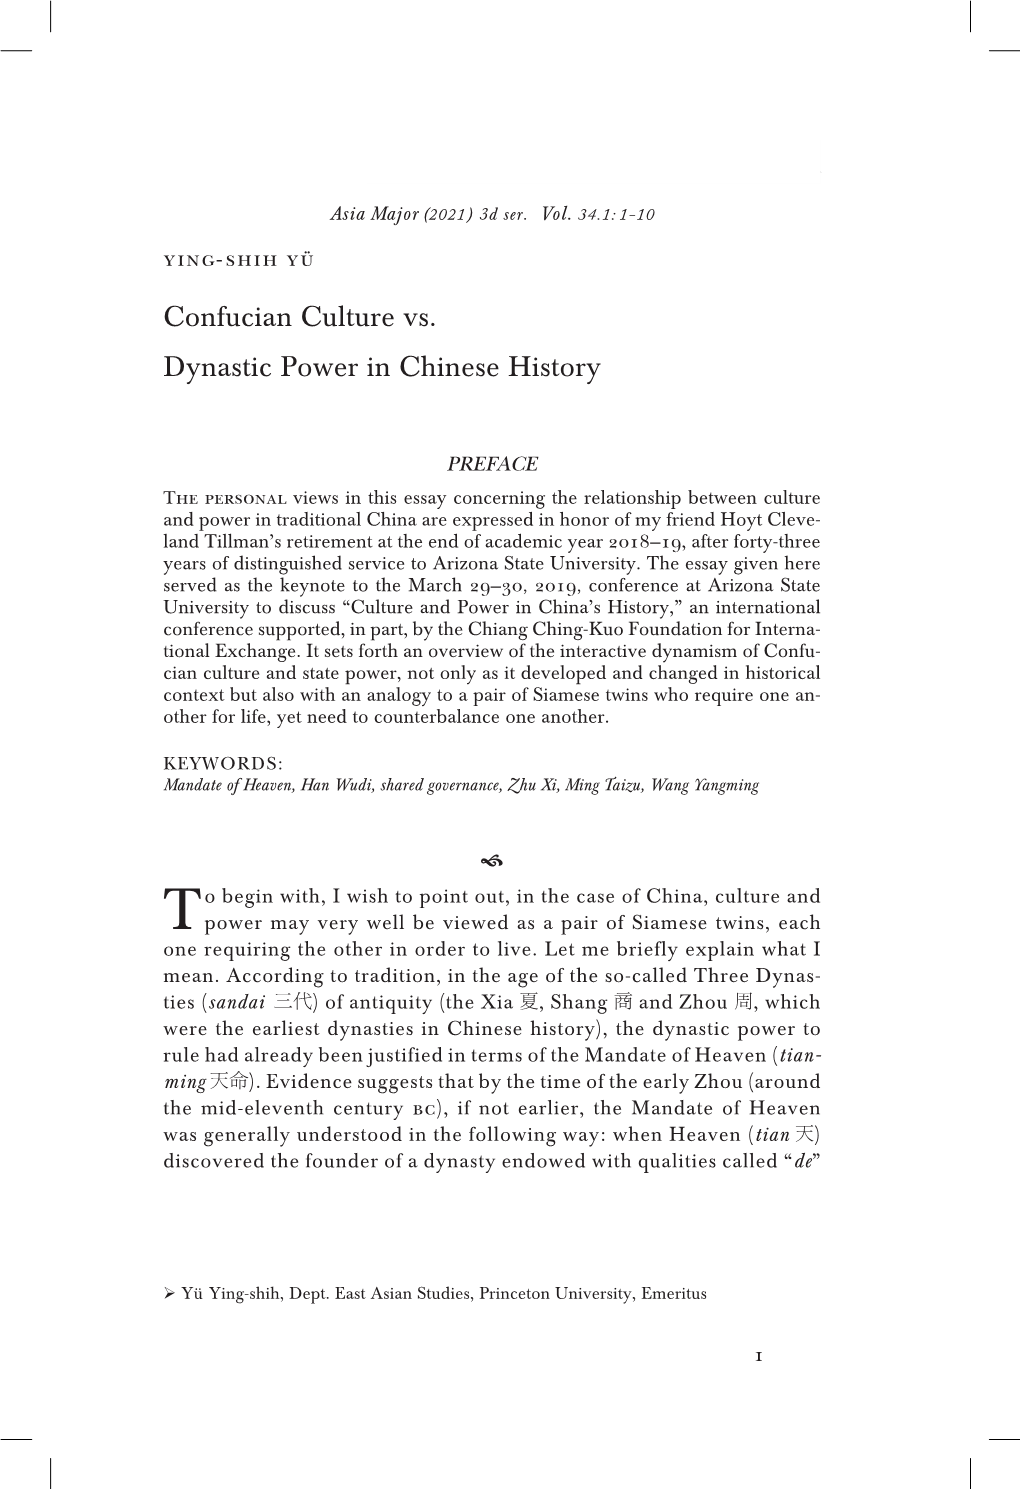 Confucian Culture Vs. Dynastic Power in Chinese History